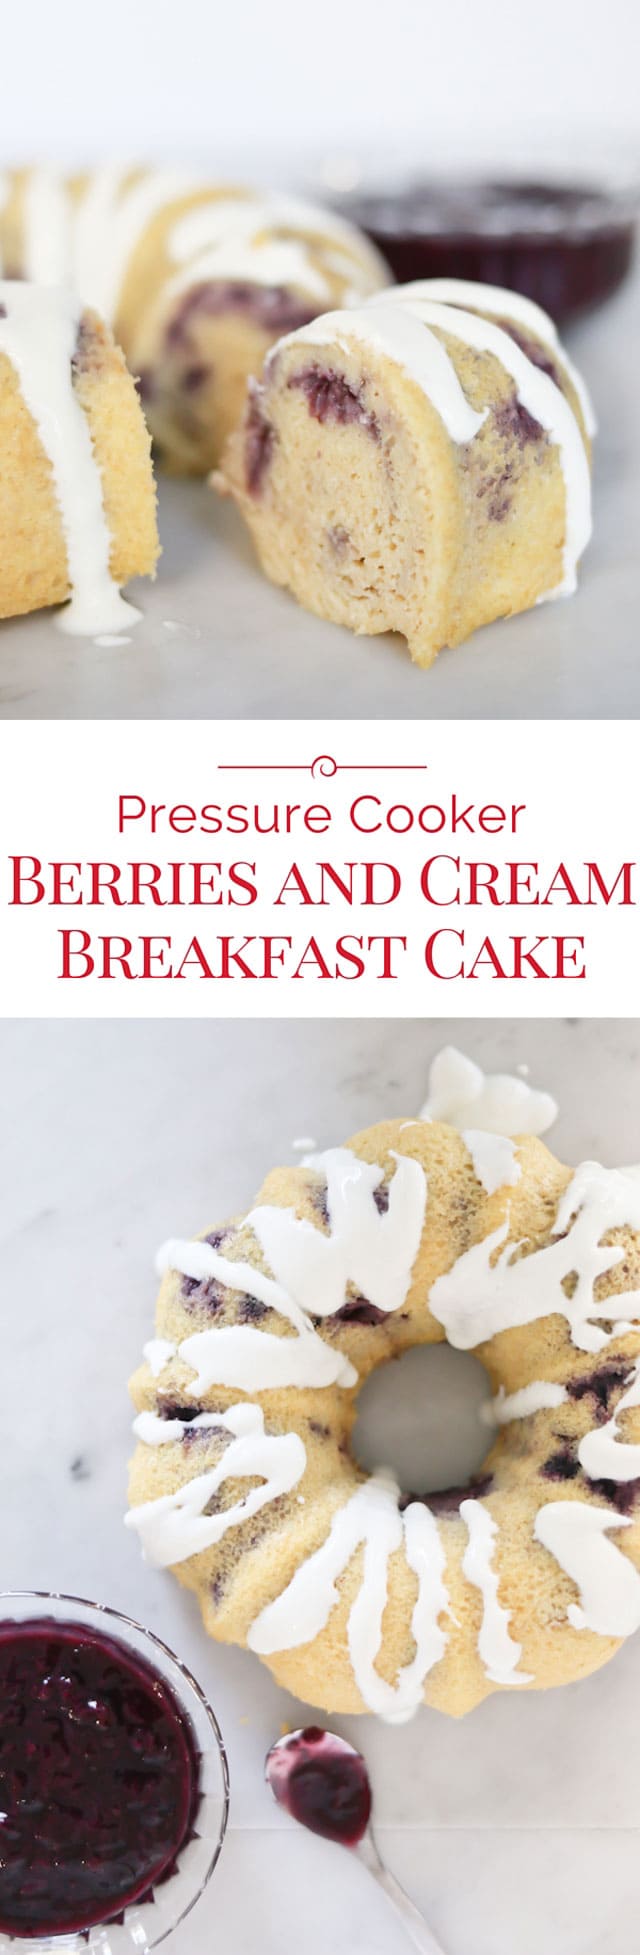 Berries and Cream Breakfast Cake is pretty enough to be called a cake, but healthy enough to call it breakfast! Make mornings special with this 100% whole grain, protein rich breakfast cake recipe for your Pressure Cooker! #instantpot #pressurecooker #breakfastrecipe #cake via @PressureCook2da